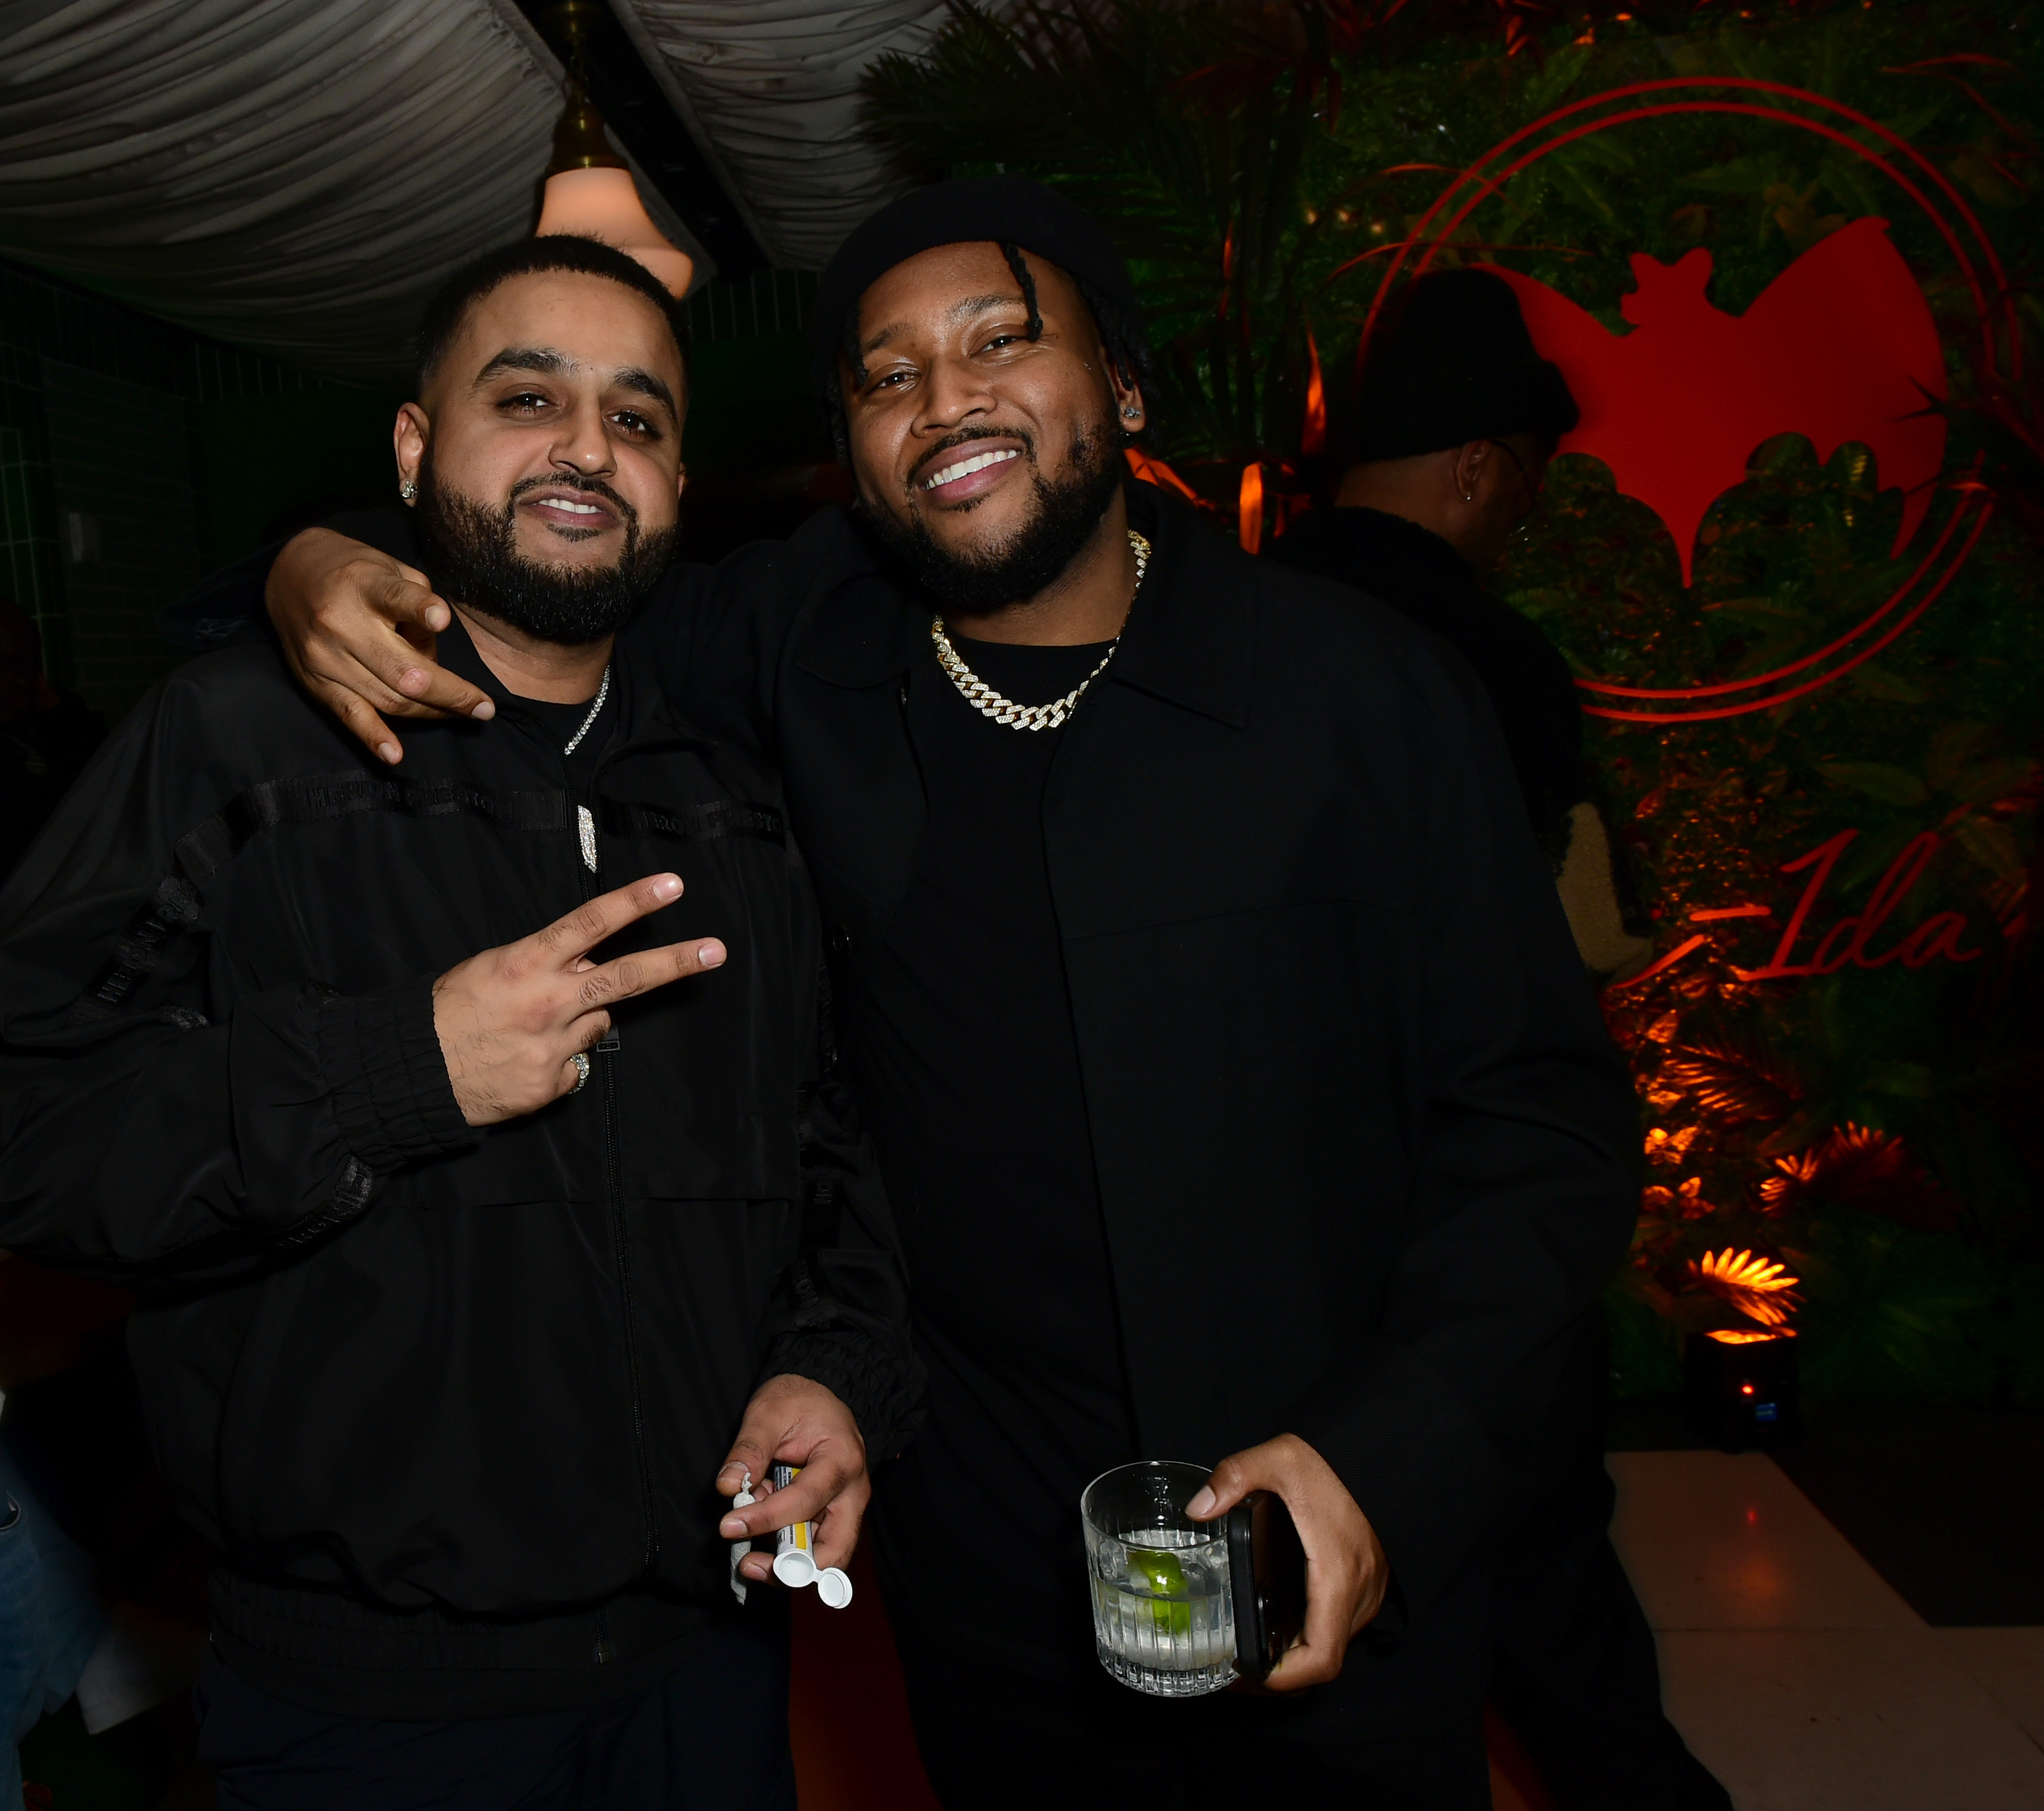 Boi 1da and Nav at the Bacardi Grammys party